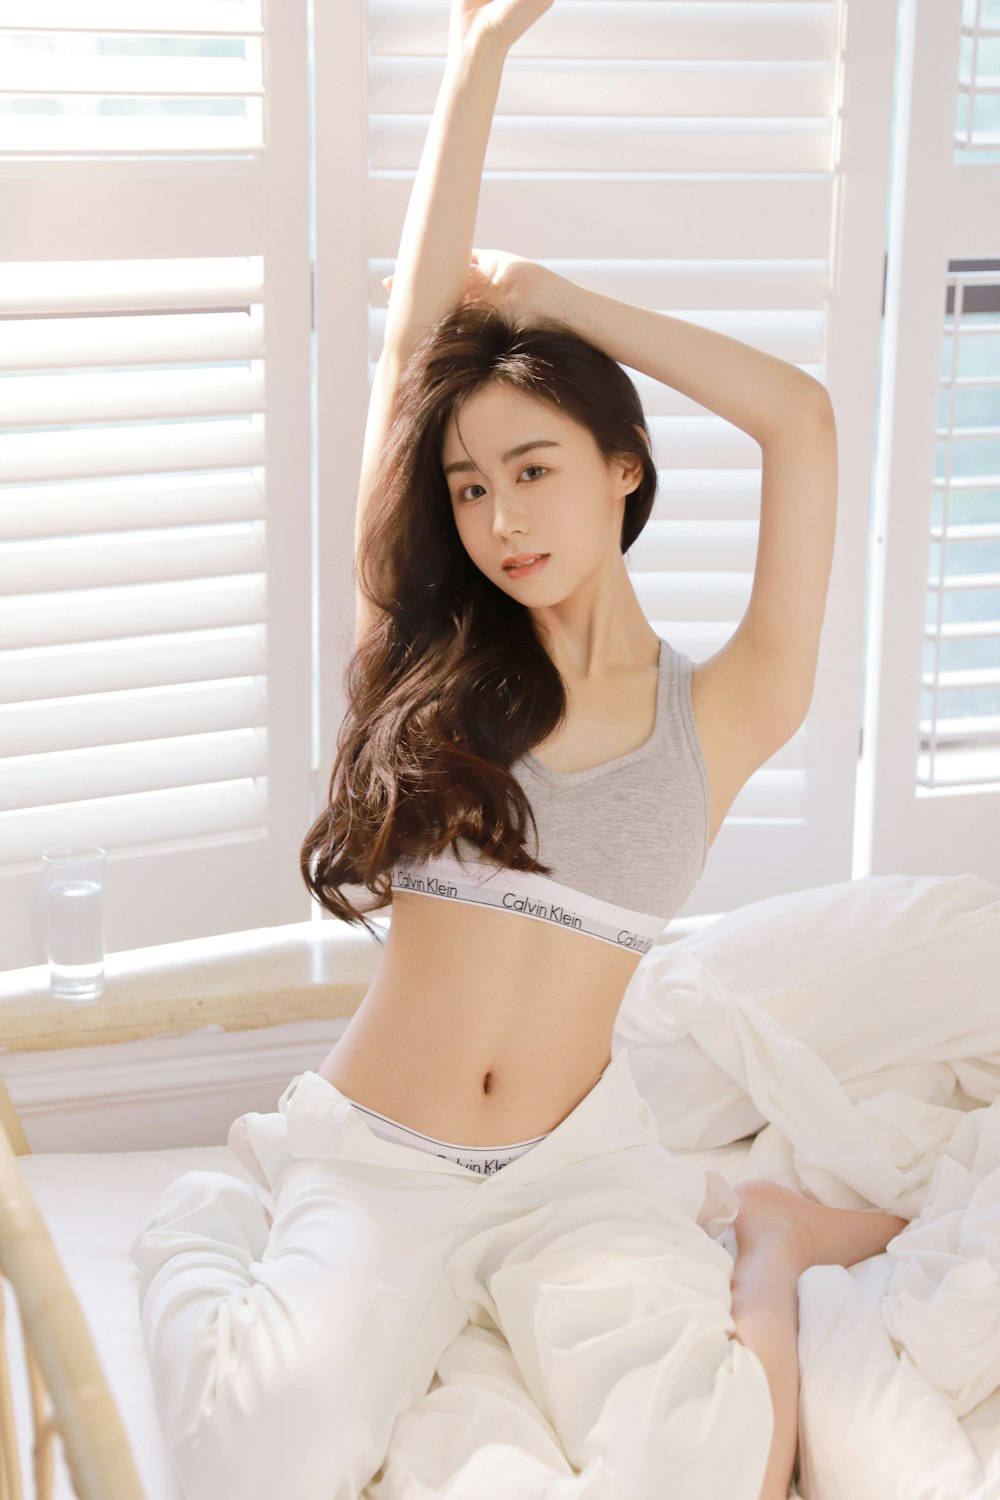 a woman in a gray top and white pants sitting on a bed